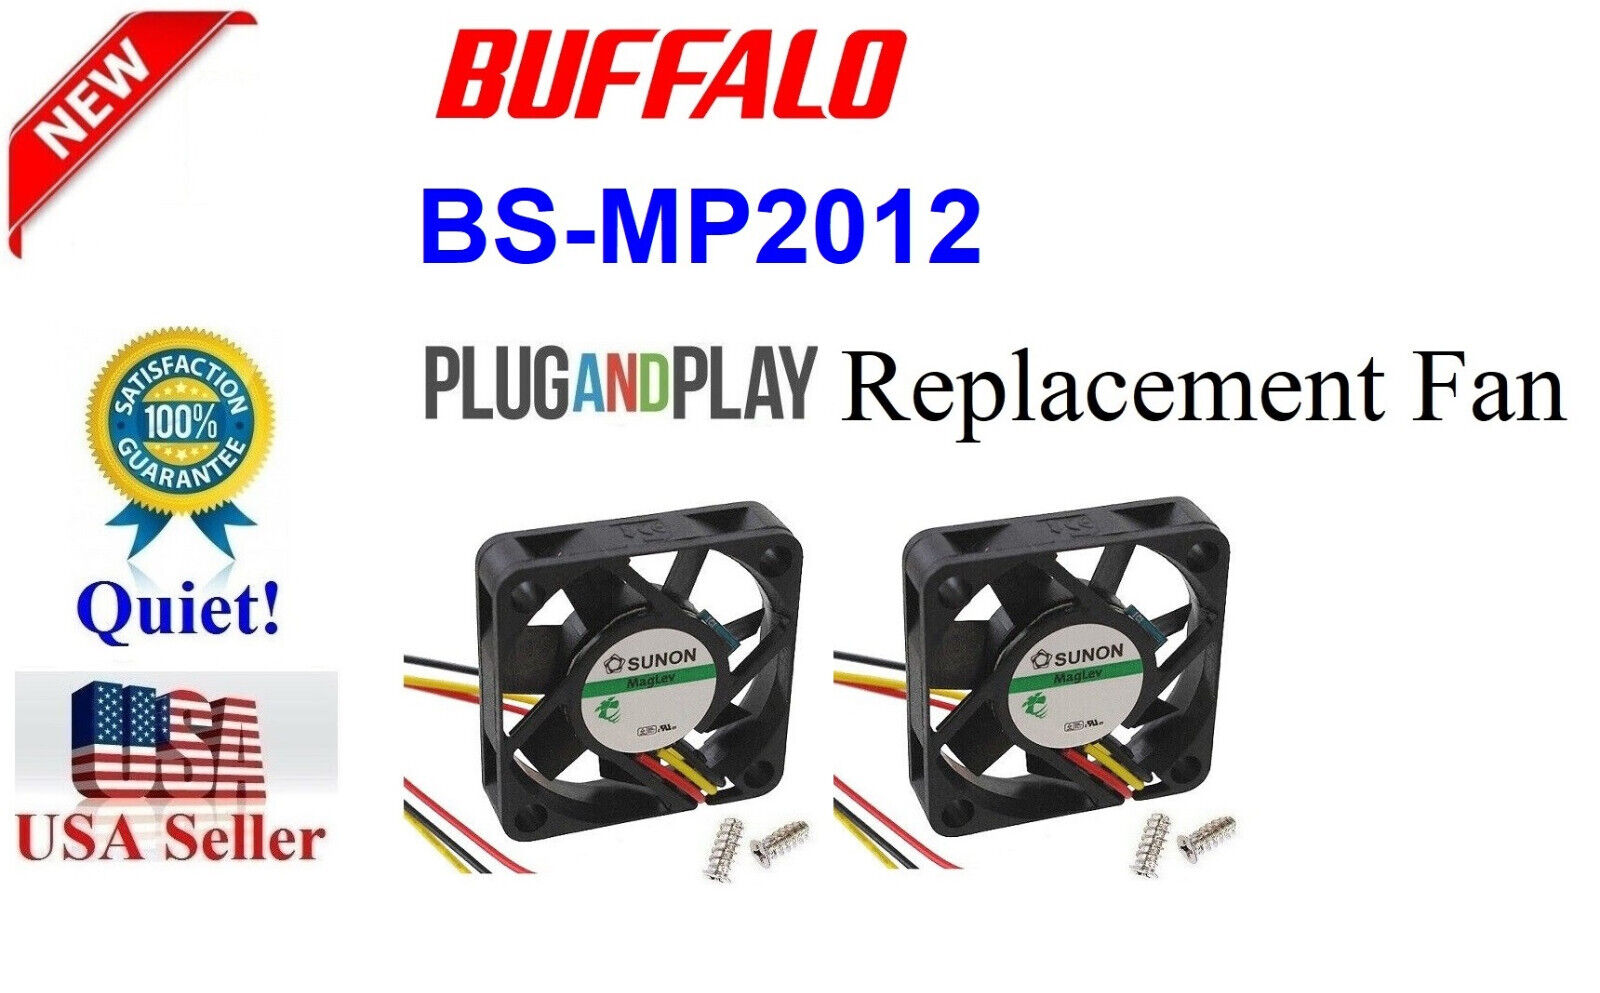 2x *Quiet* Plug-and-Play Replacement Fans for BS-MP2012 Buffalo 12 Port Switch 